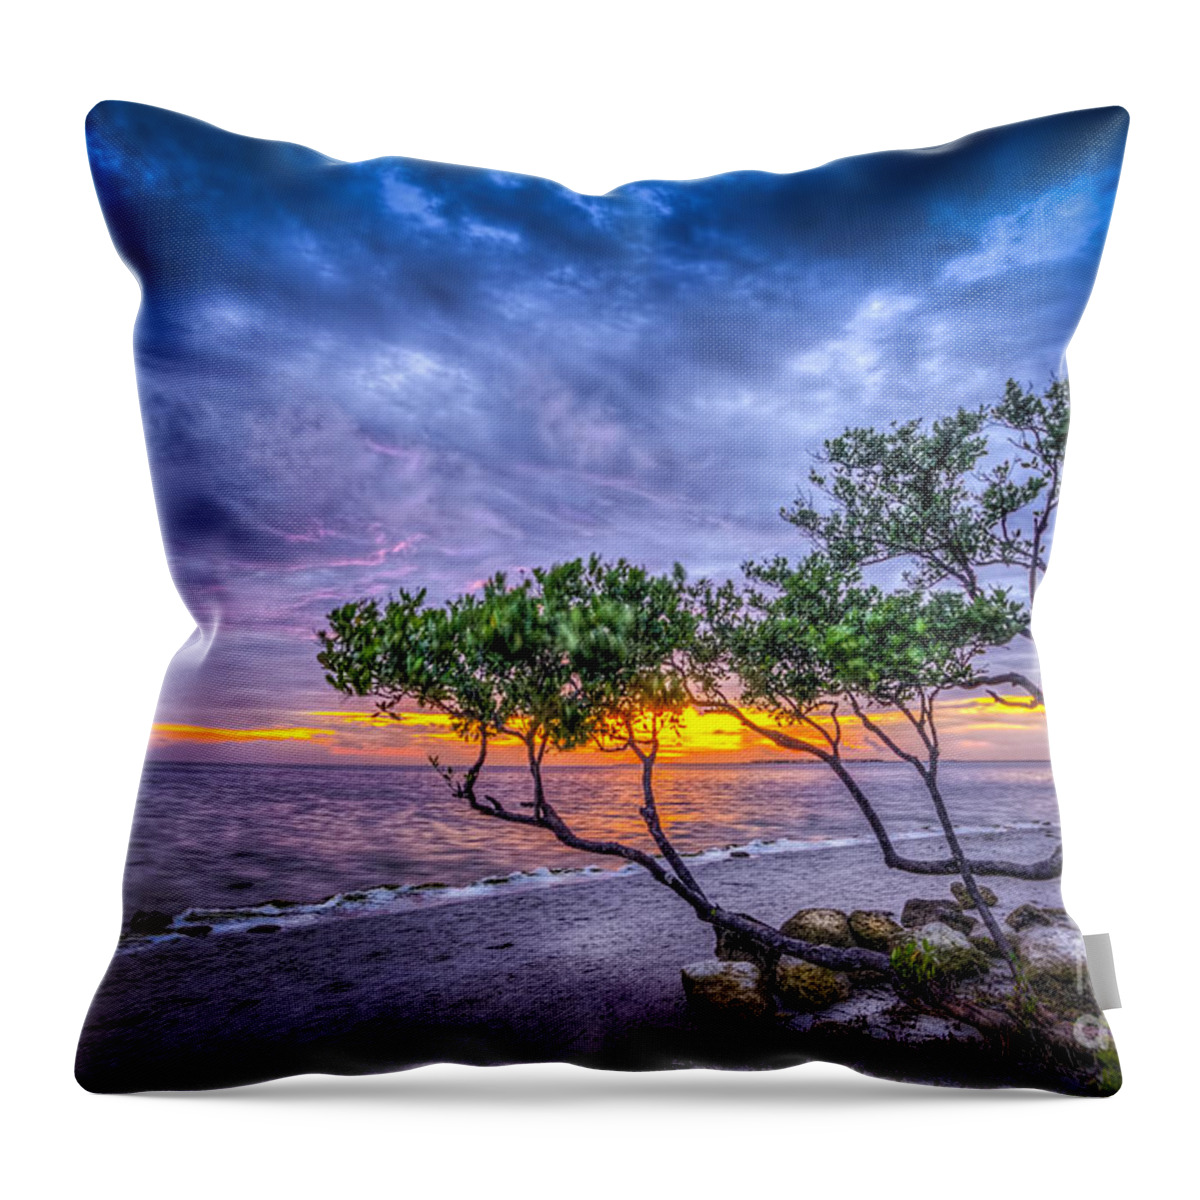 Clouds Throw Pillow featuring the photograph I Feel It by Marvin Spates